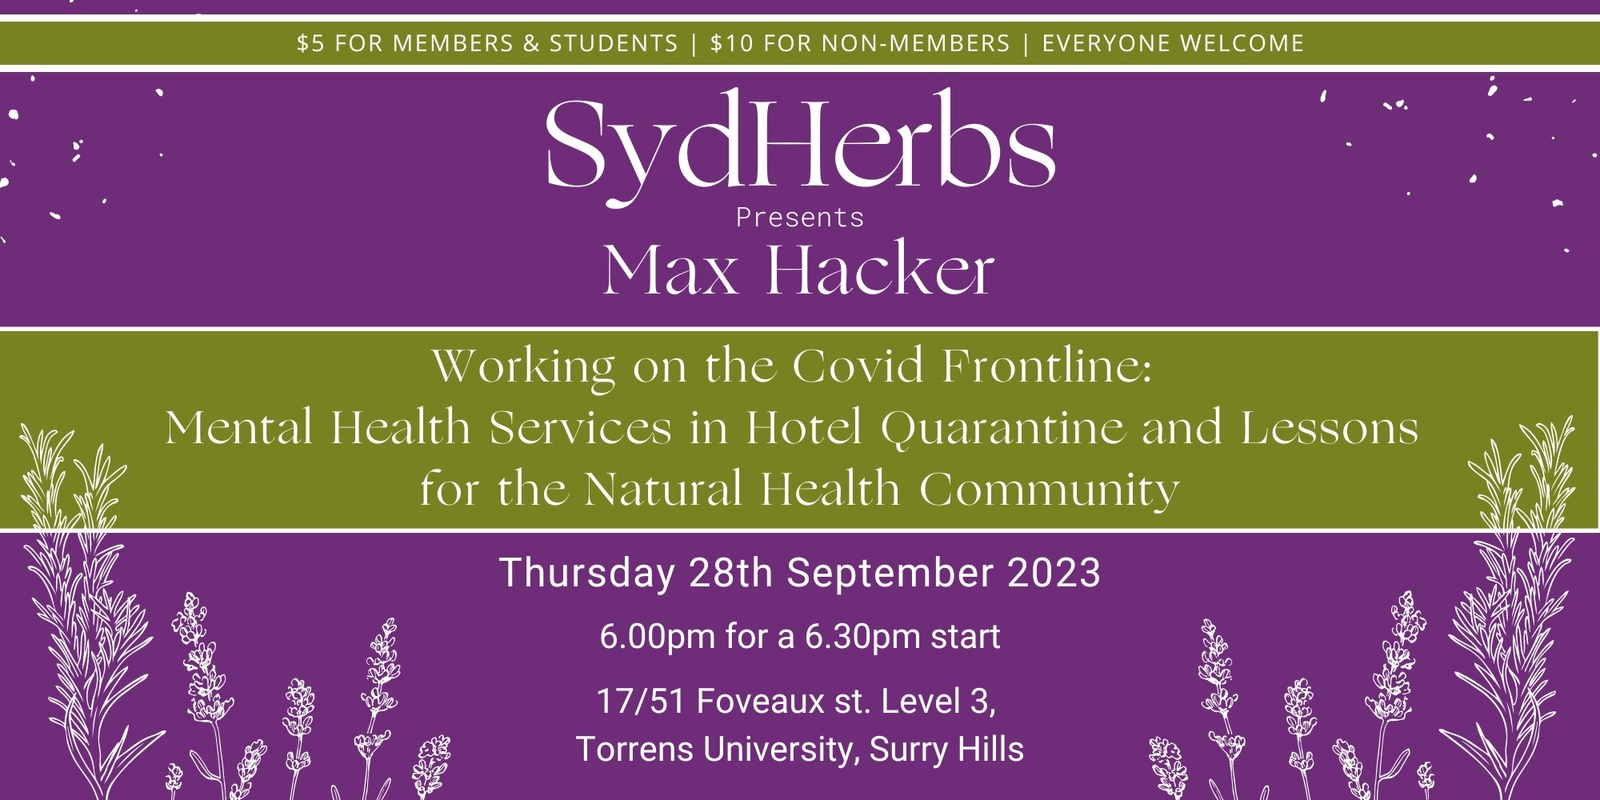 Banner image for SydHerbs Presents Max Hacker: Working on the Covid Frontline - Mental Health Services in Hotel Quarantine and Lessons for the Natural Health Community